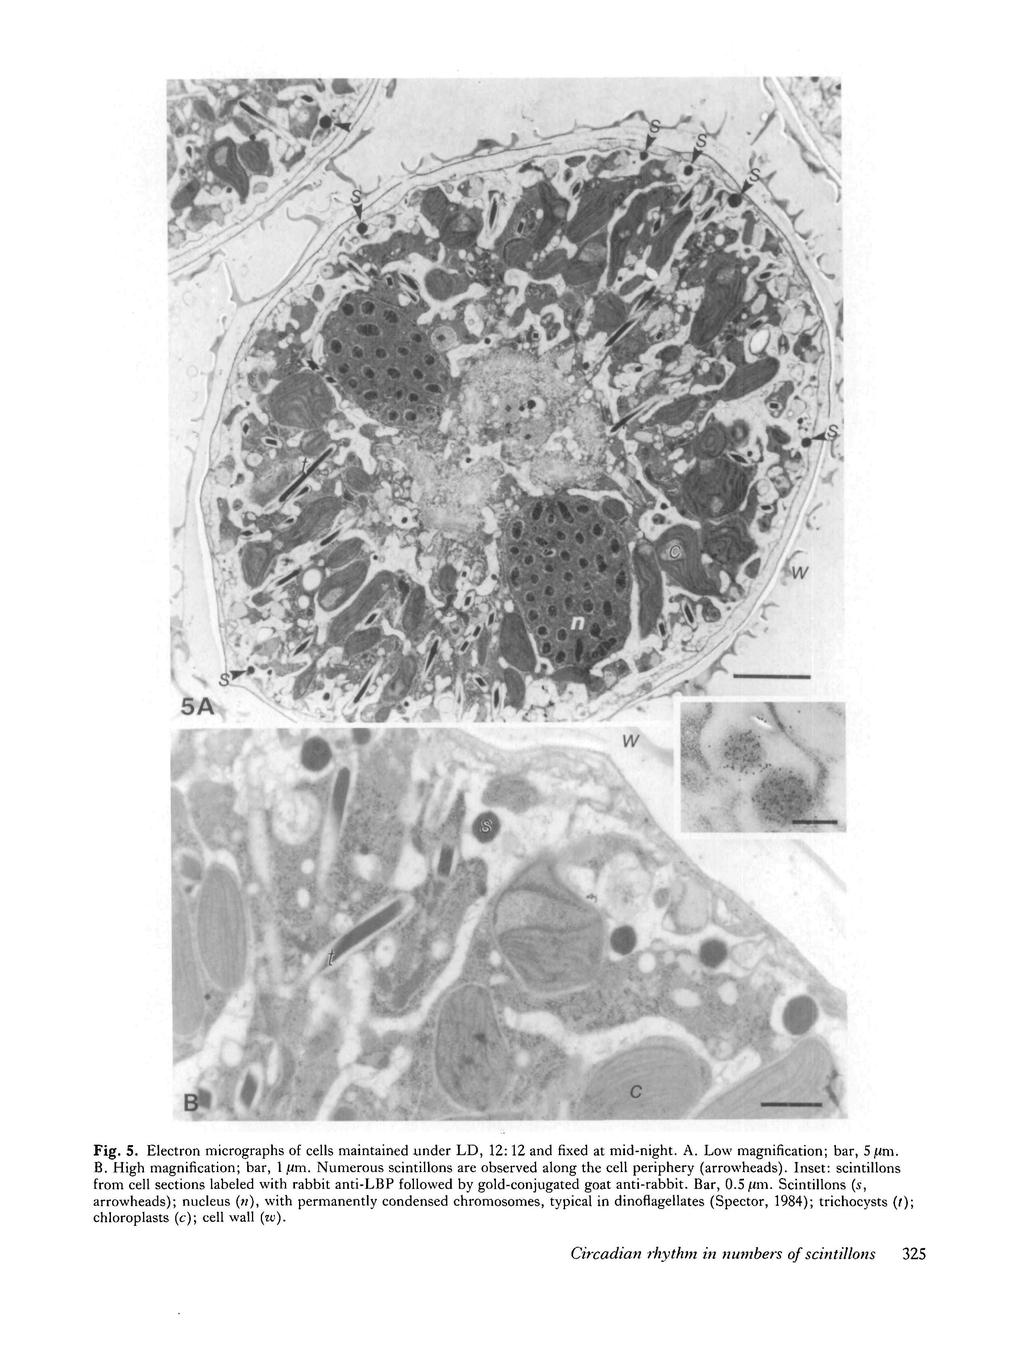 Fig. 5. Electron micrographs of cells maintained under LD, 12:12 and fixed at mid-night. A. Low magnification; bar, 5jUm. B. High magnification; bar, 1 jim.